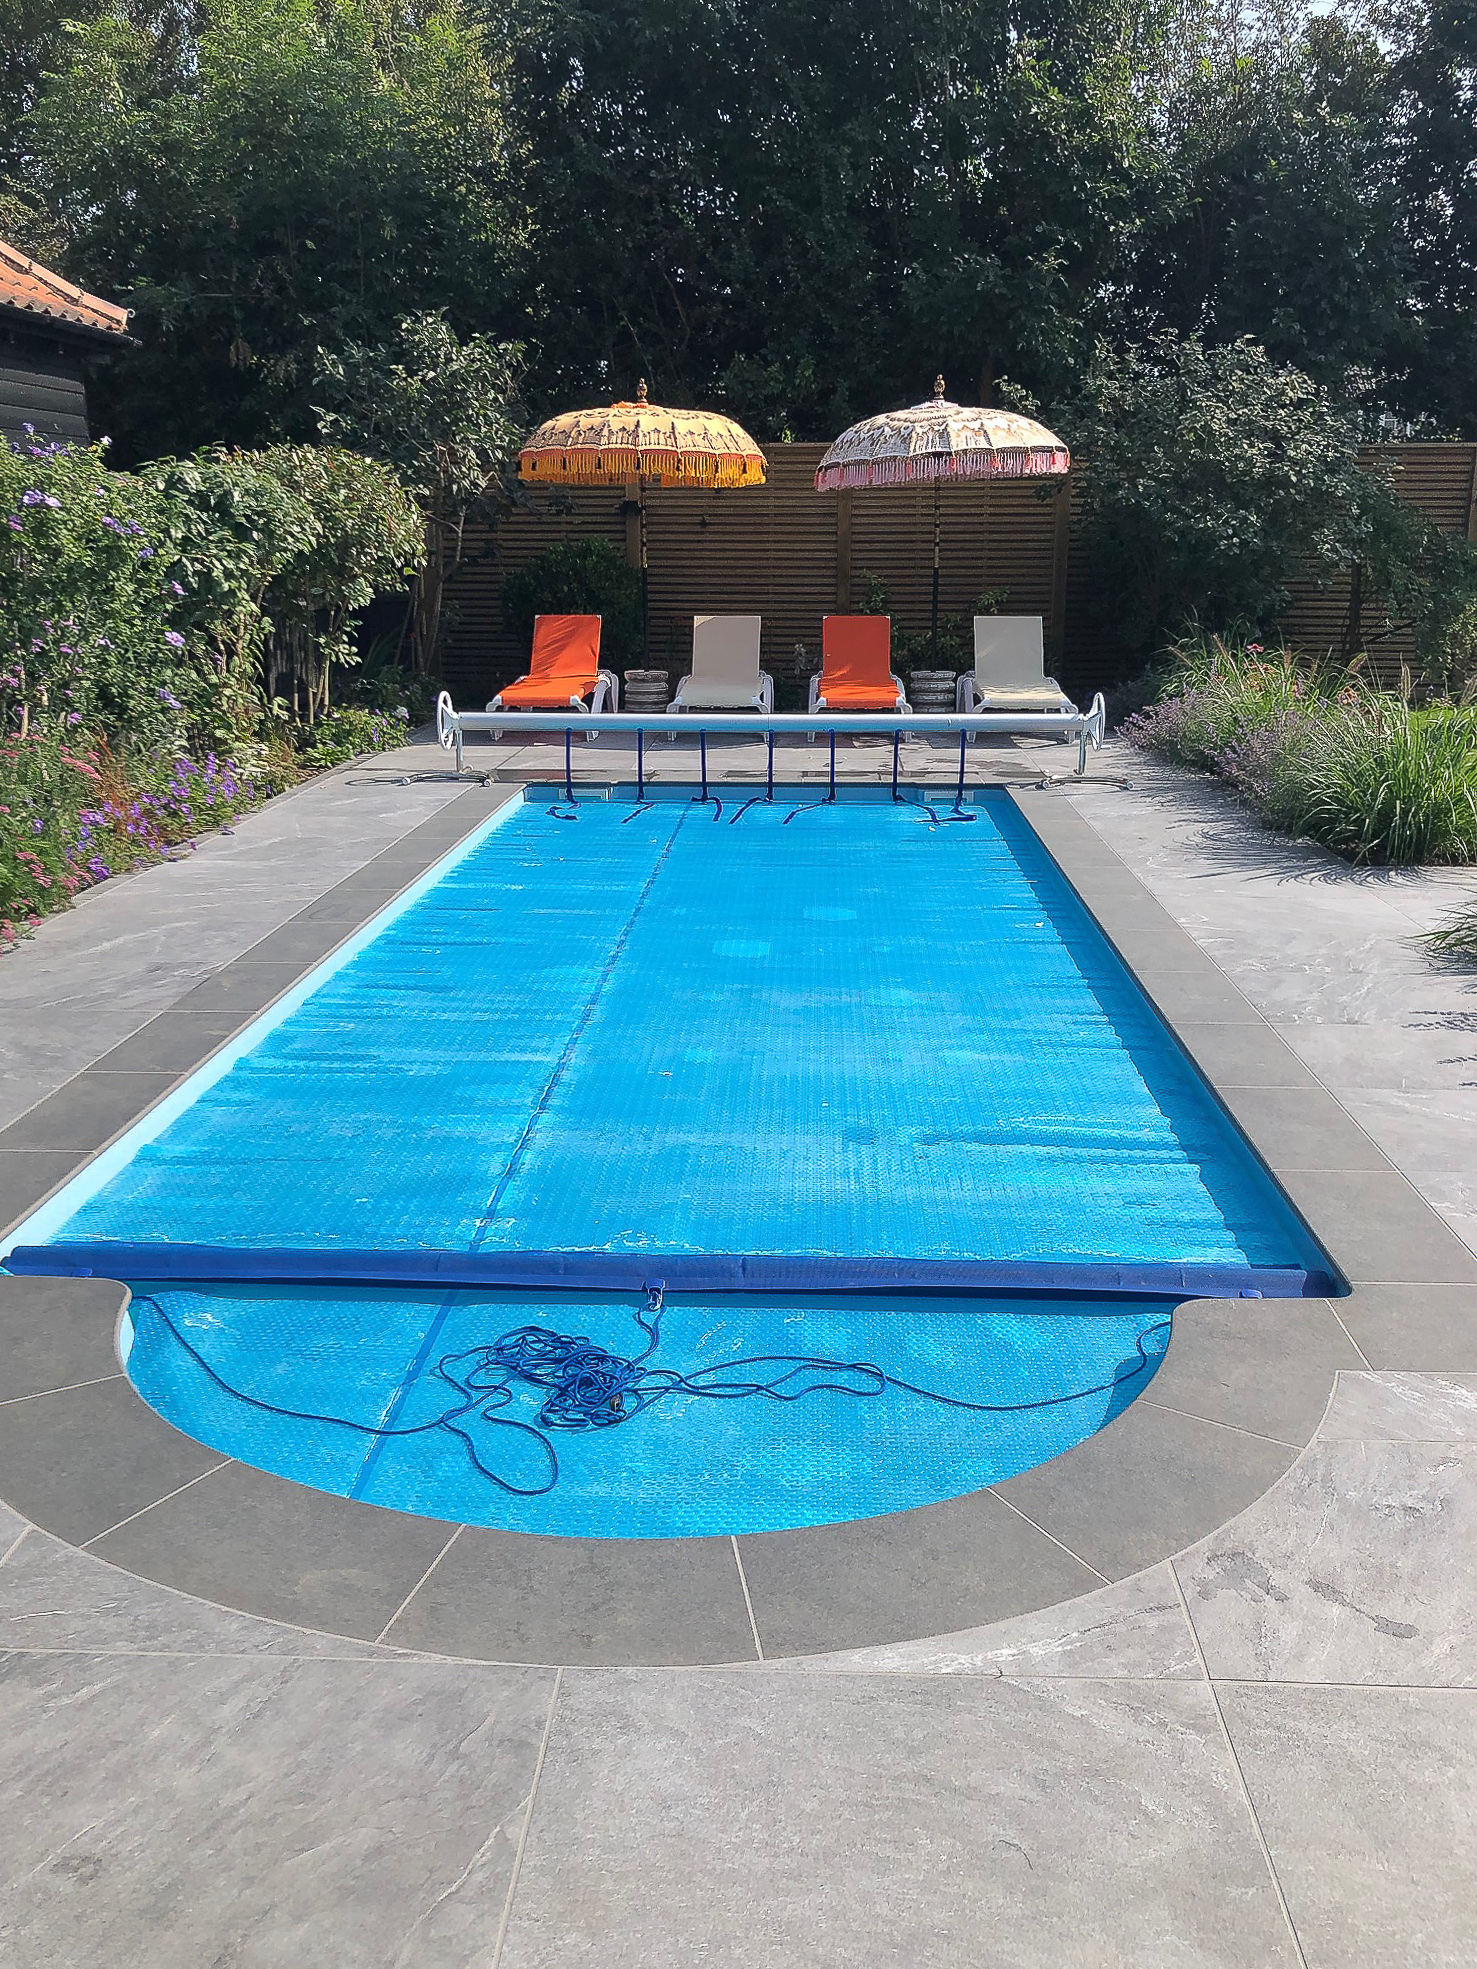 Fibreflass Pool with Safety Cover Customer Gallery 09/18/2021